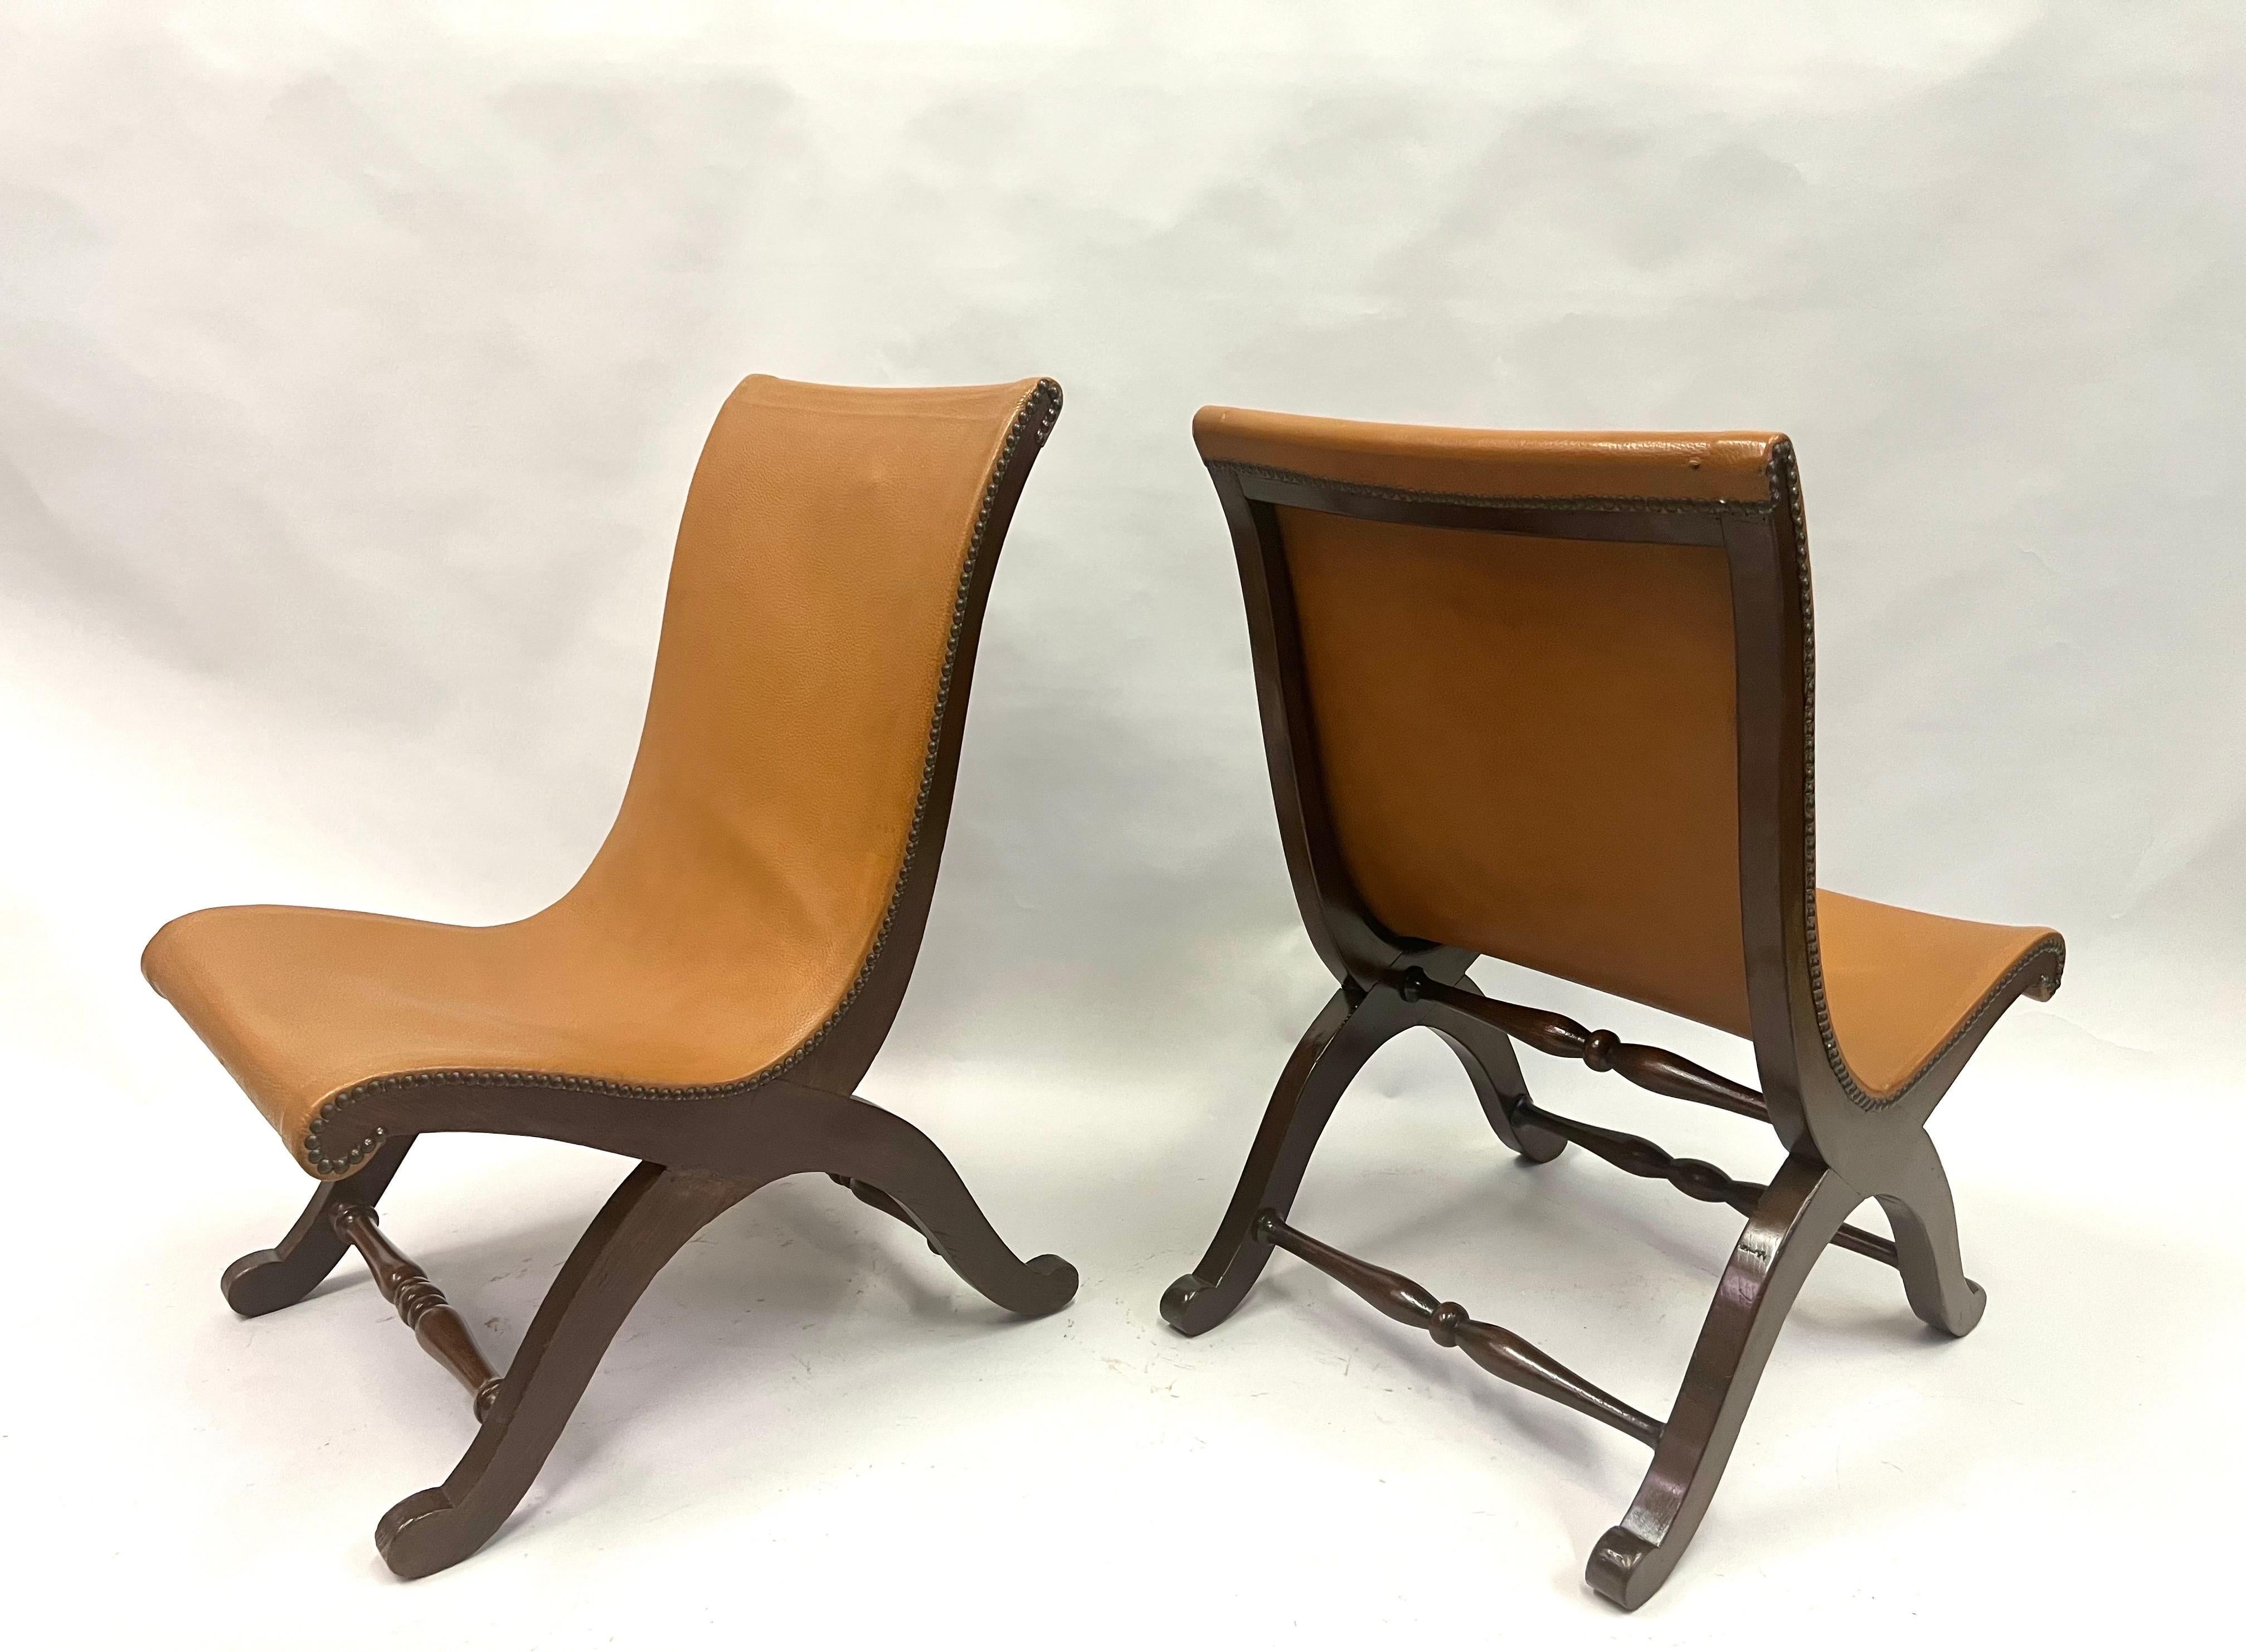 Pair of French Modern Neoclassical Leather Lounge / Slipper Chairs, Andre Arbus In Good Condition For Sale In New York, NY